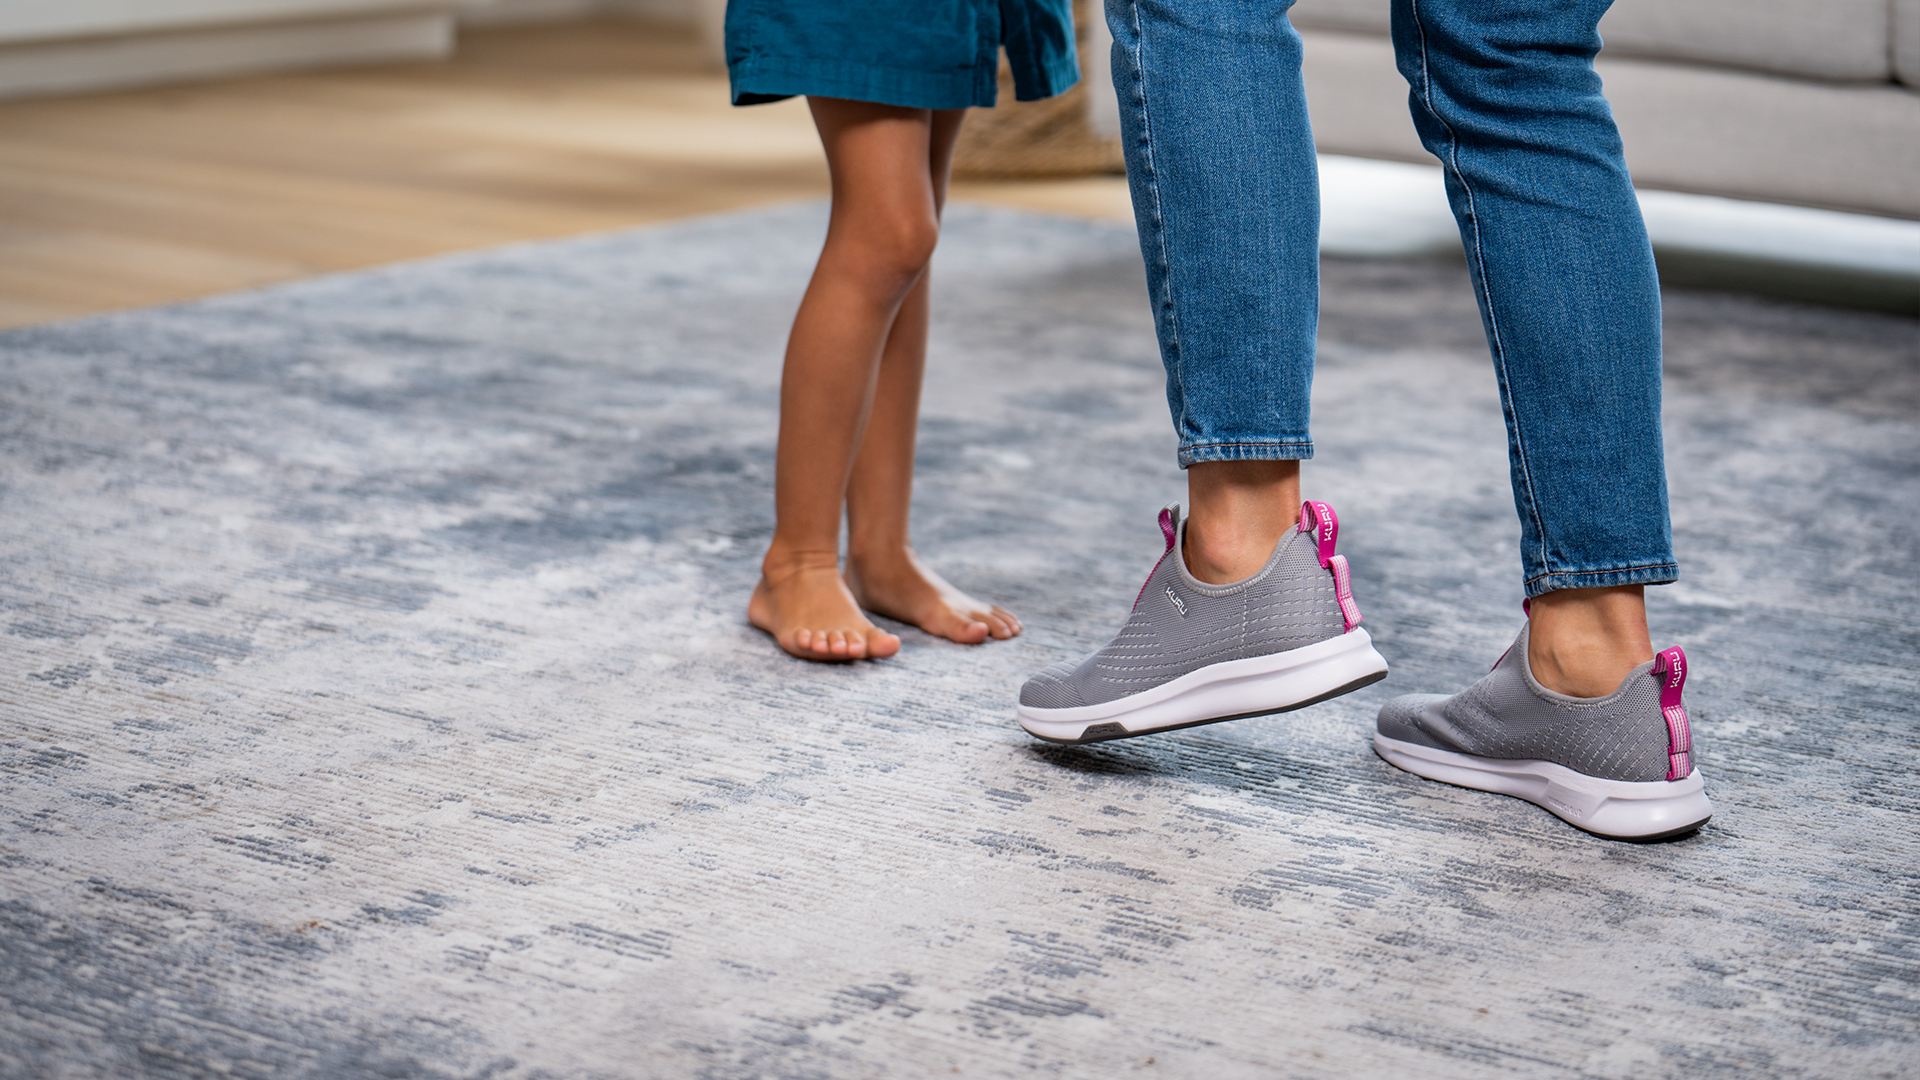 A person with their child, focusing on the feet of each. The mother wears comfortable KURU Footwear shoes on a fluffy rug